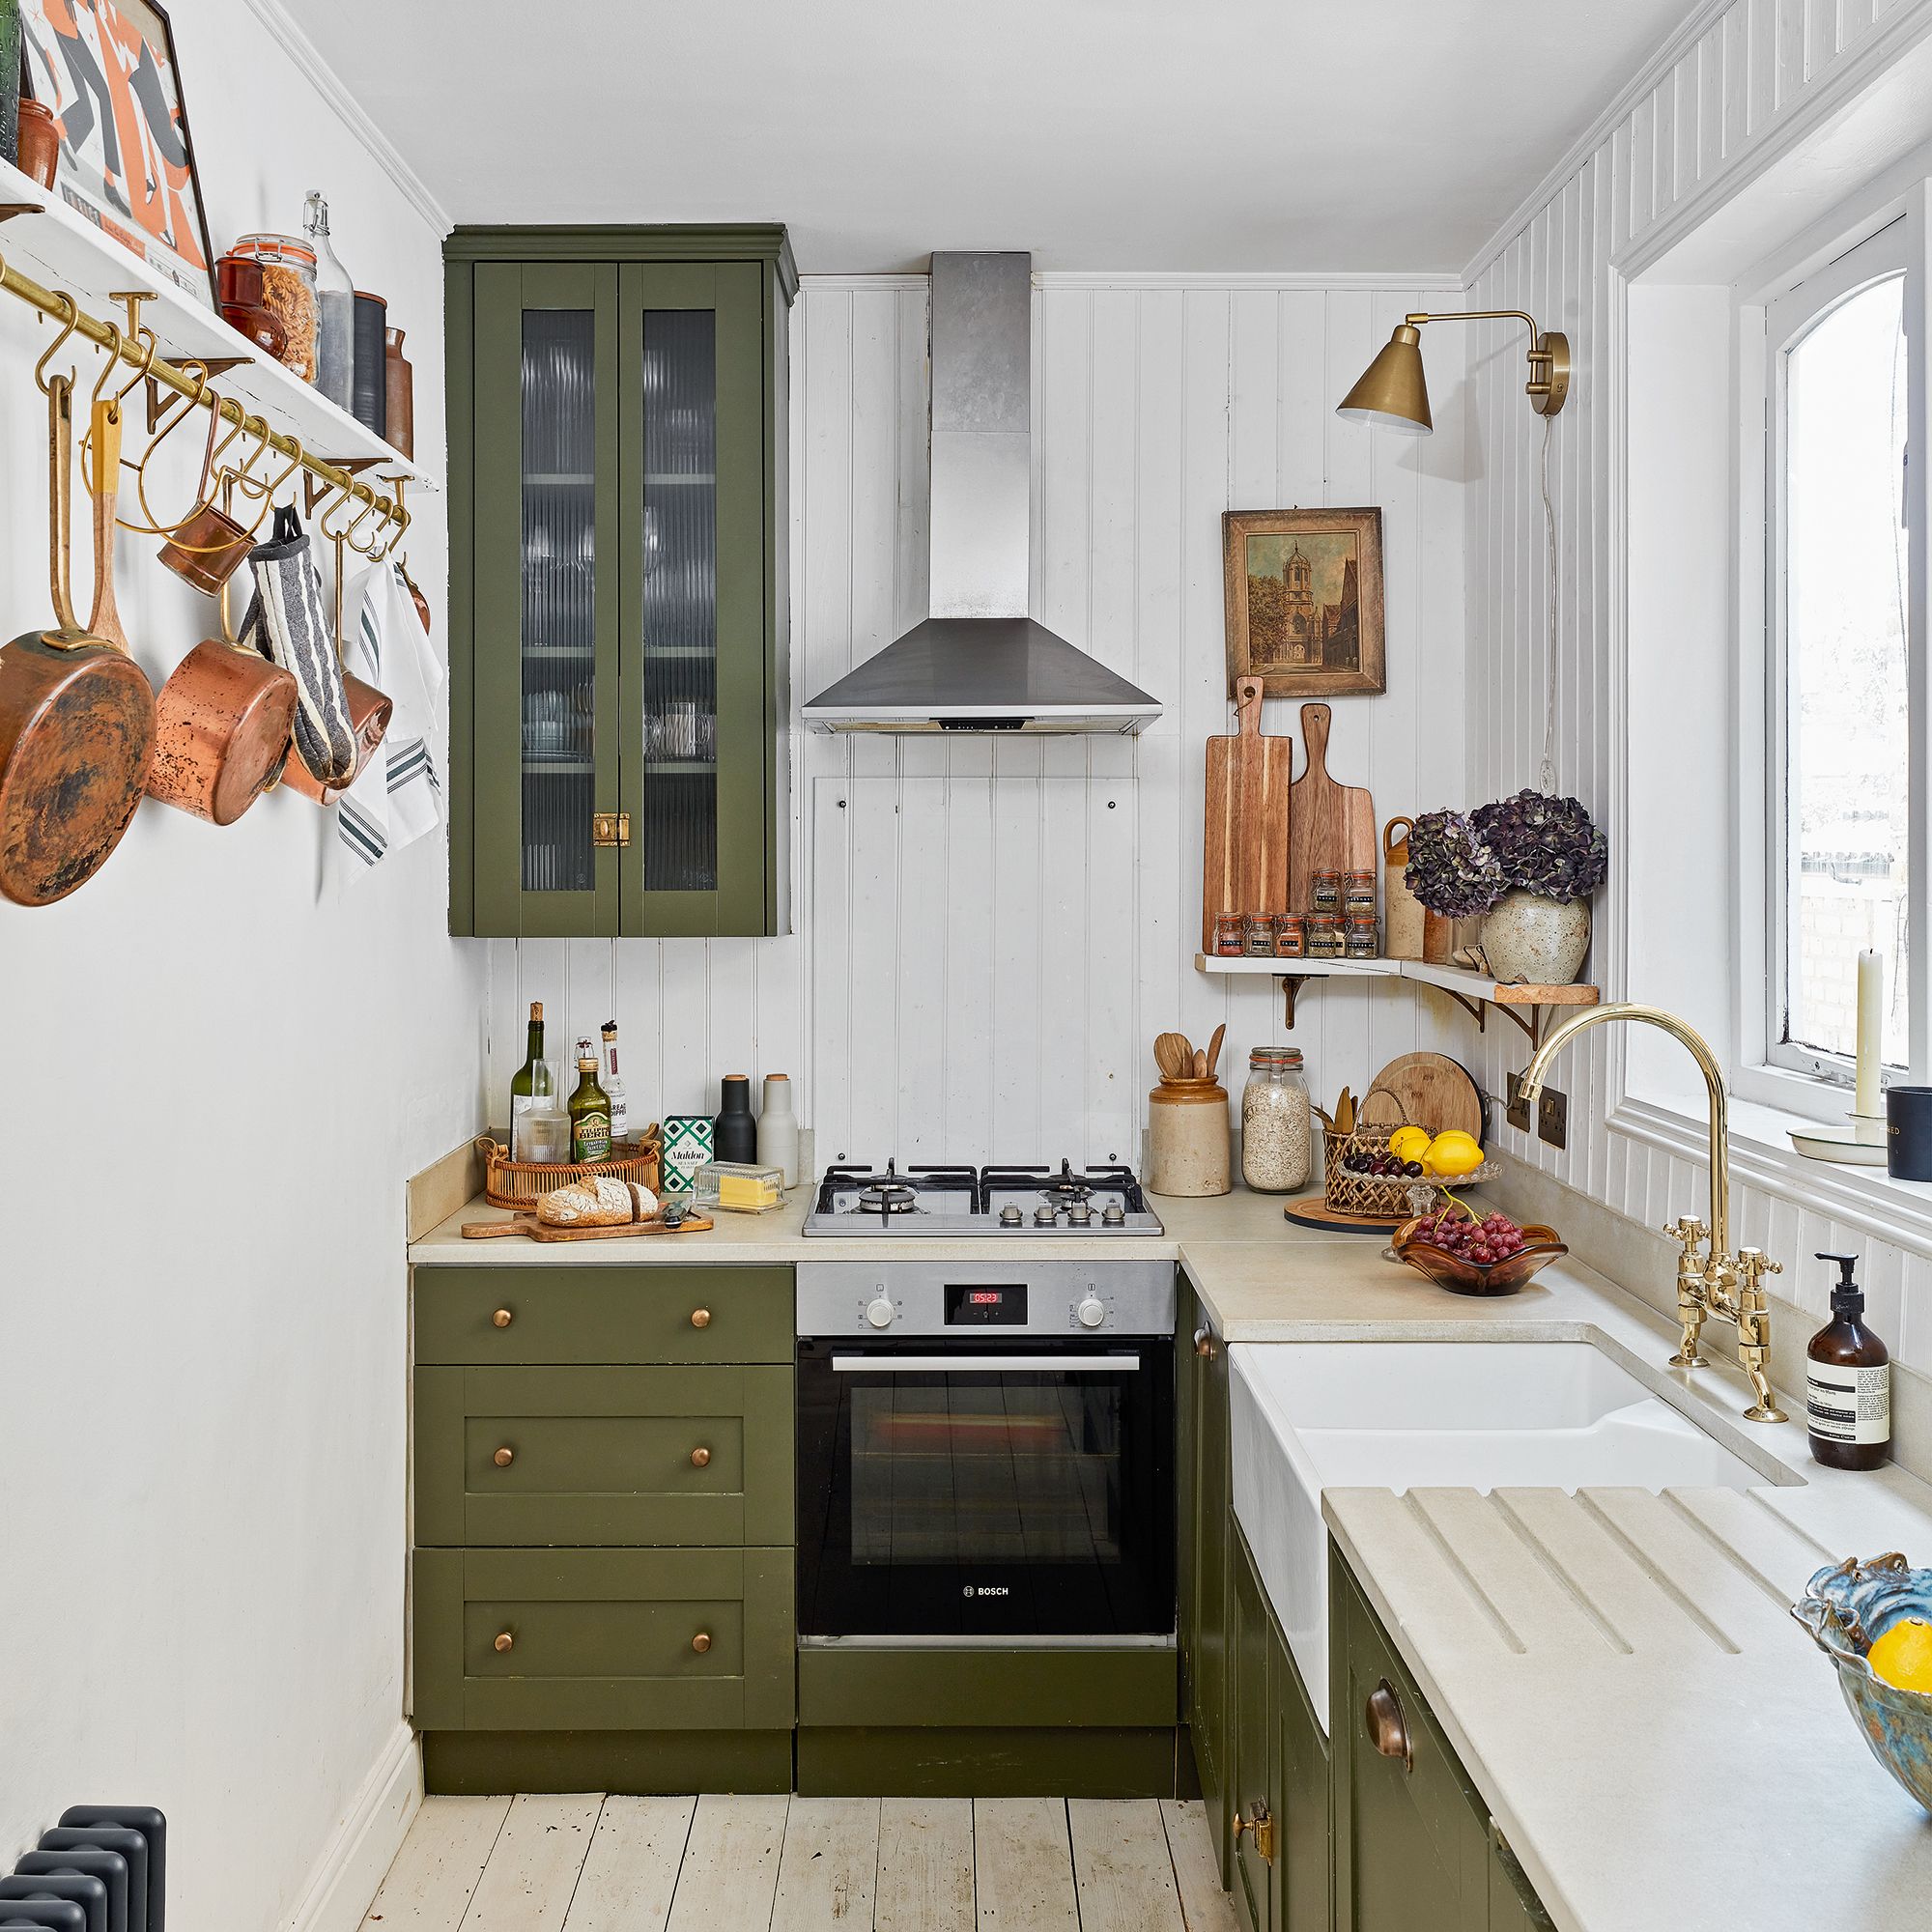 Maximizing Space: Tips for Creating a
Functional Small Kitchen